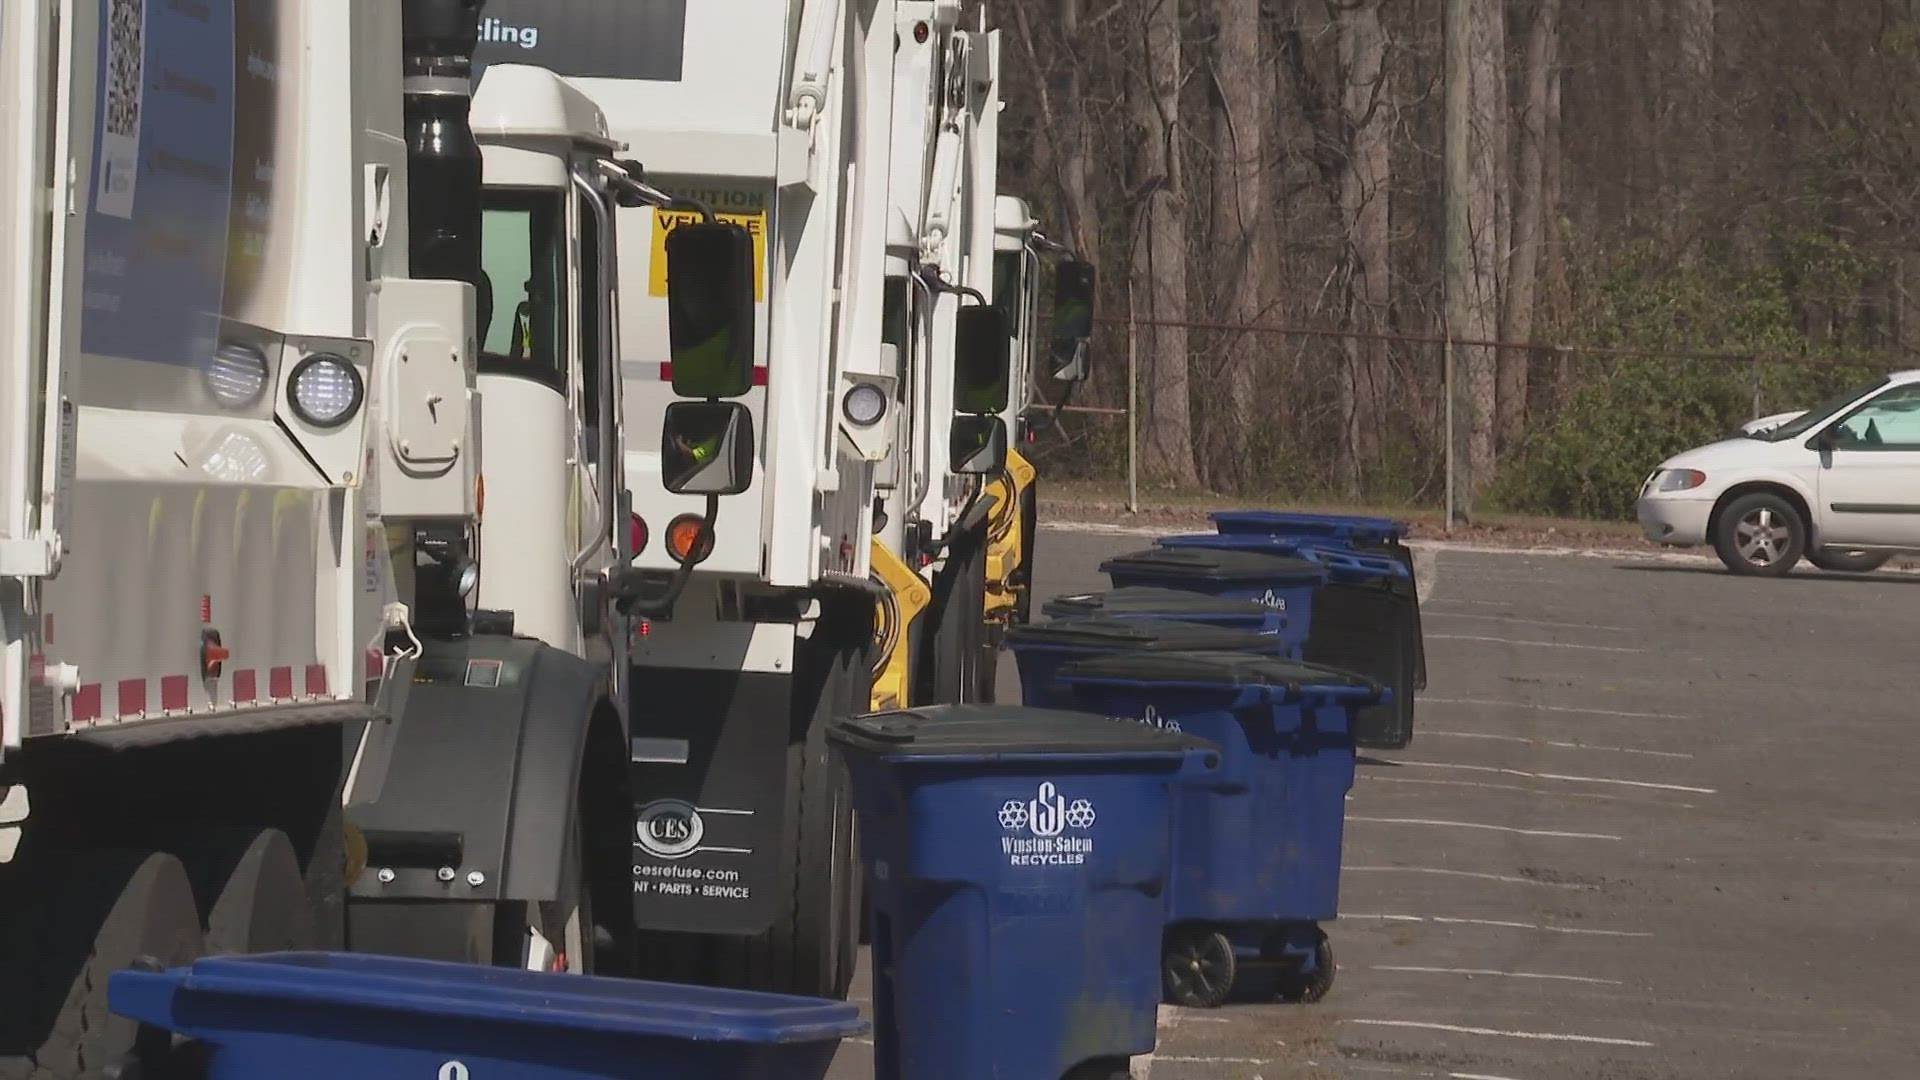 Winston-Salem sanitation workers will collect recycling instead of third-party contractors. They hope to increase the right items going into the bins.